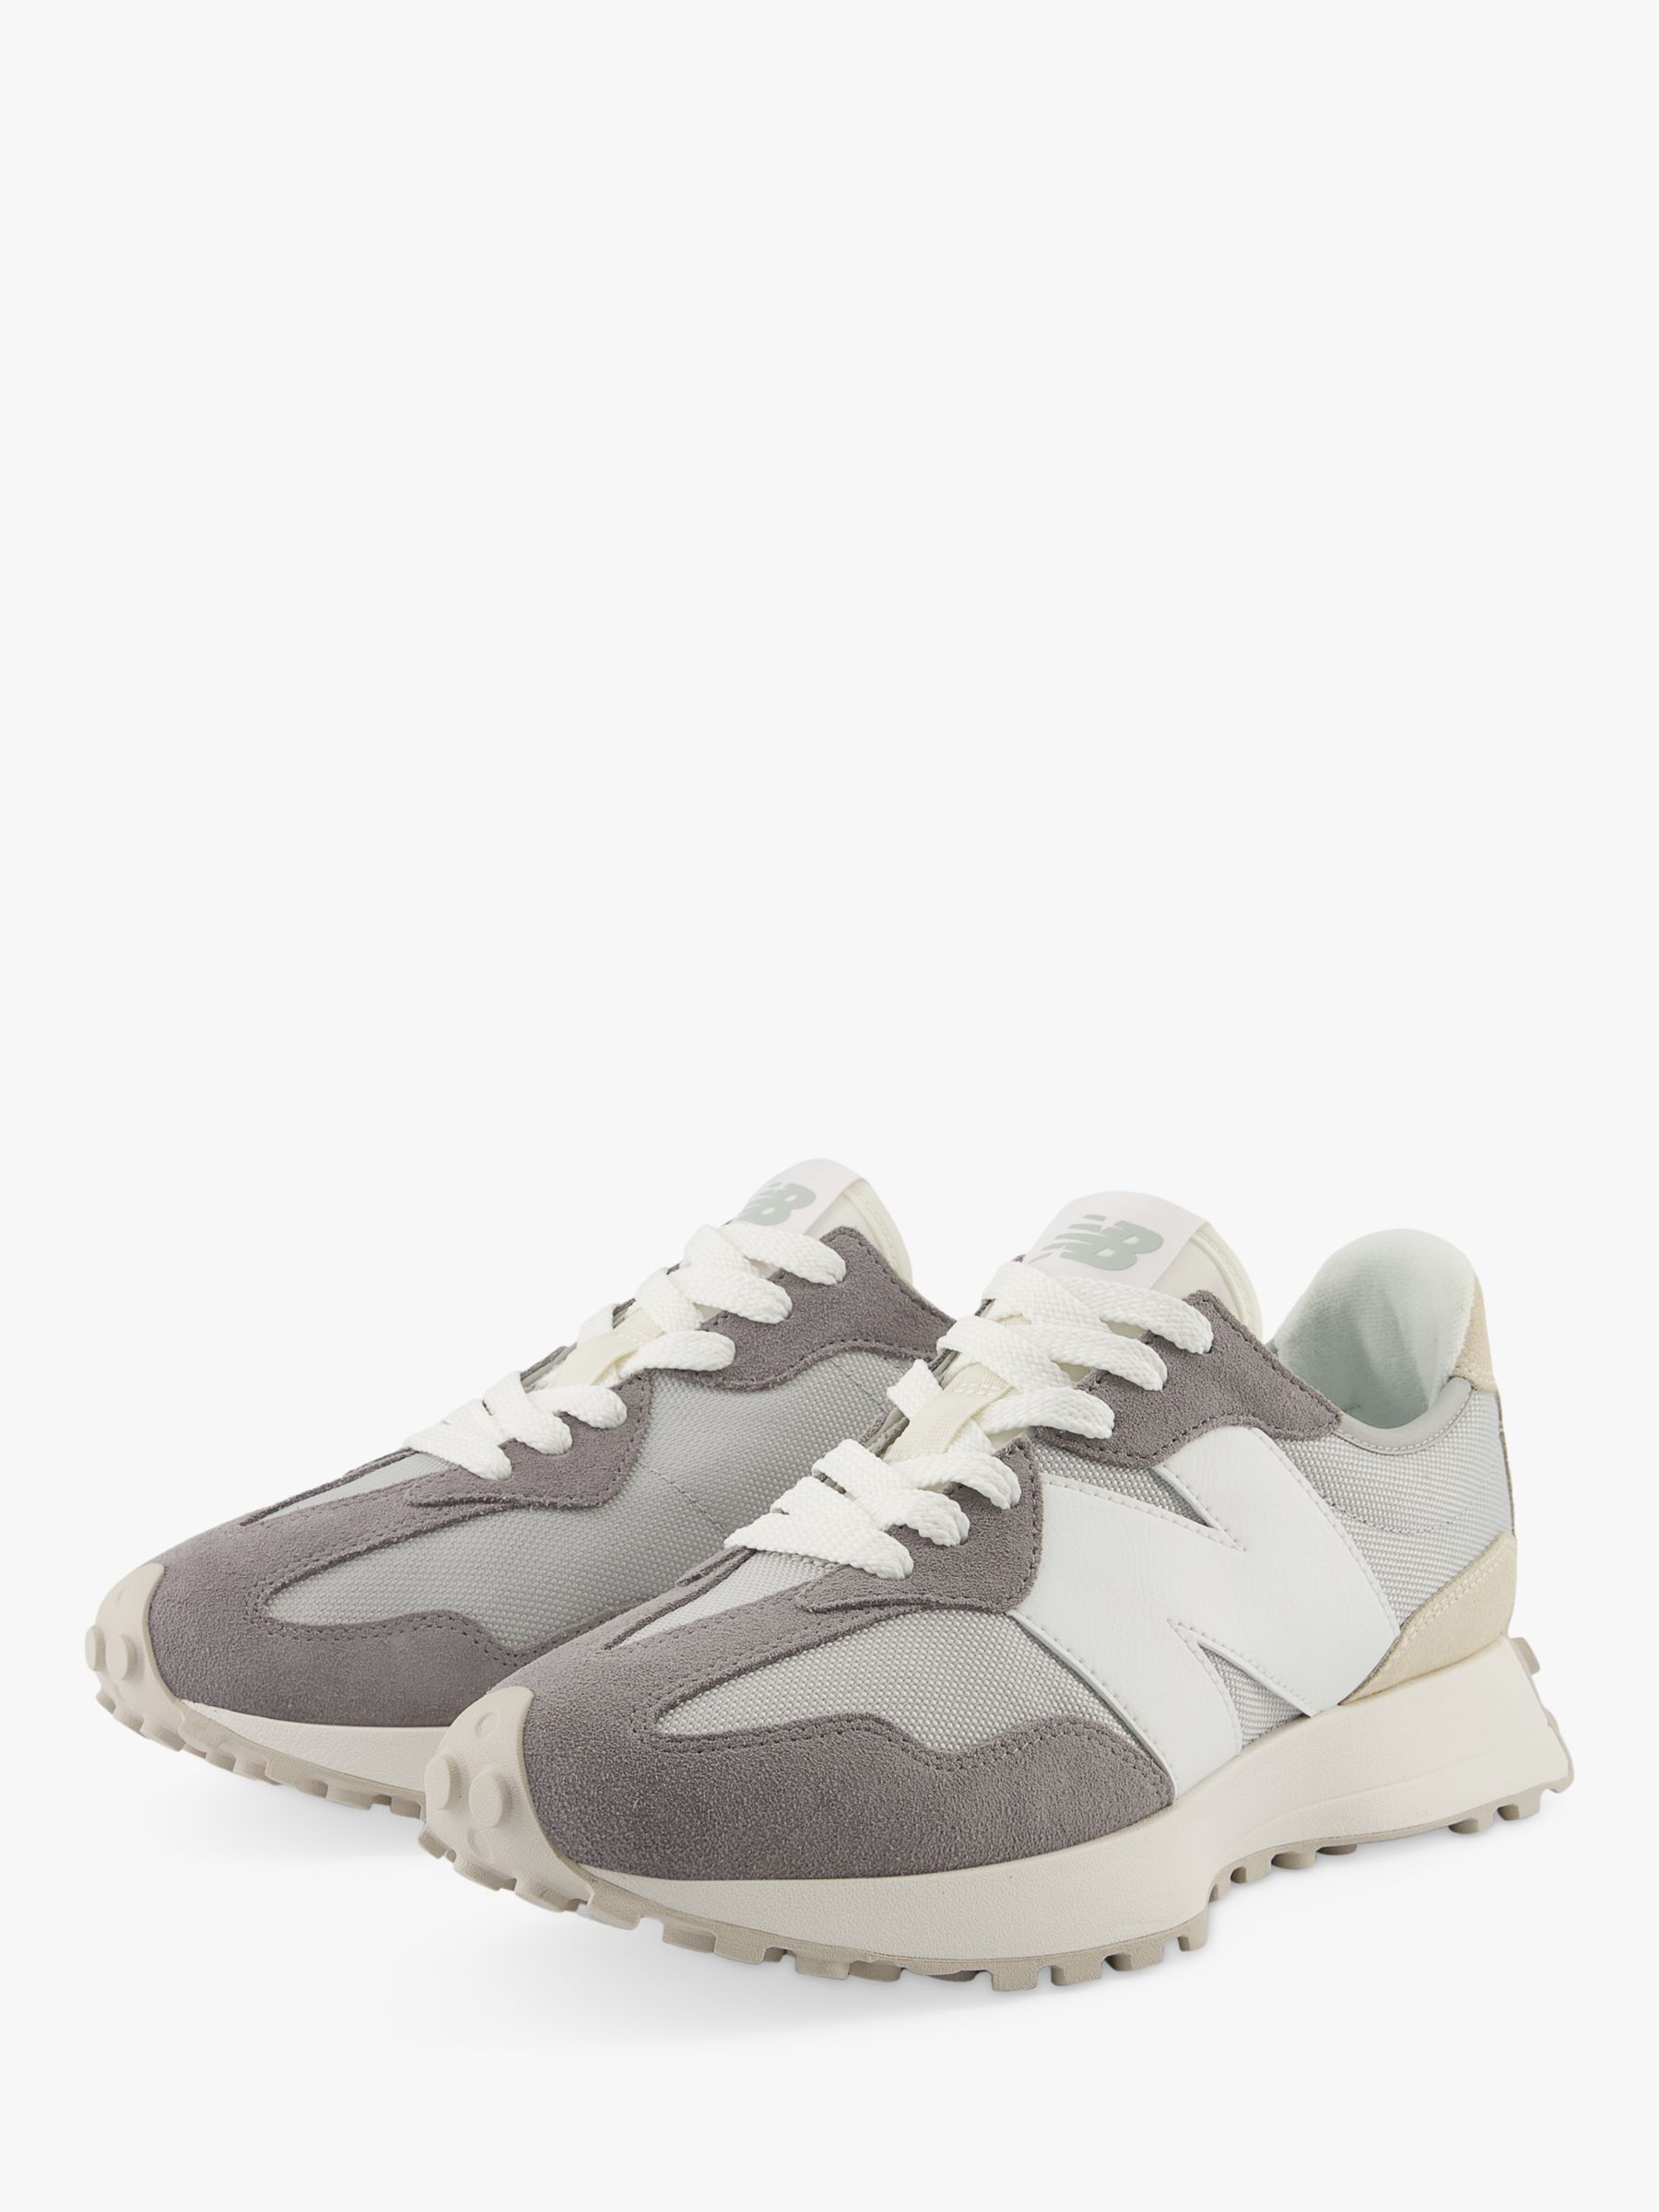 New Balance 327 Classic Suede Mesh Trainers, Grey, 10